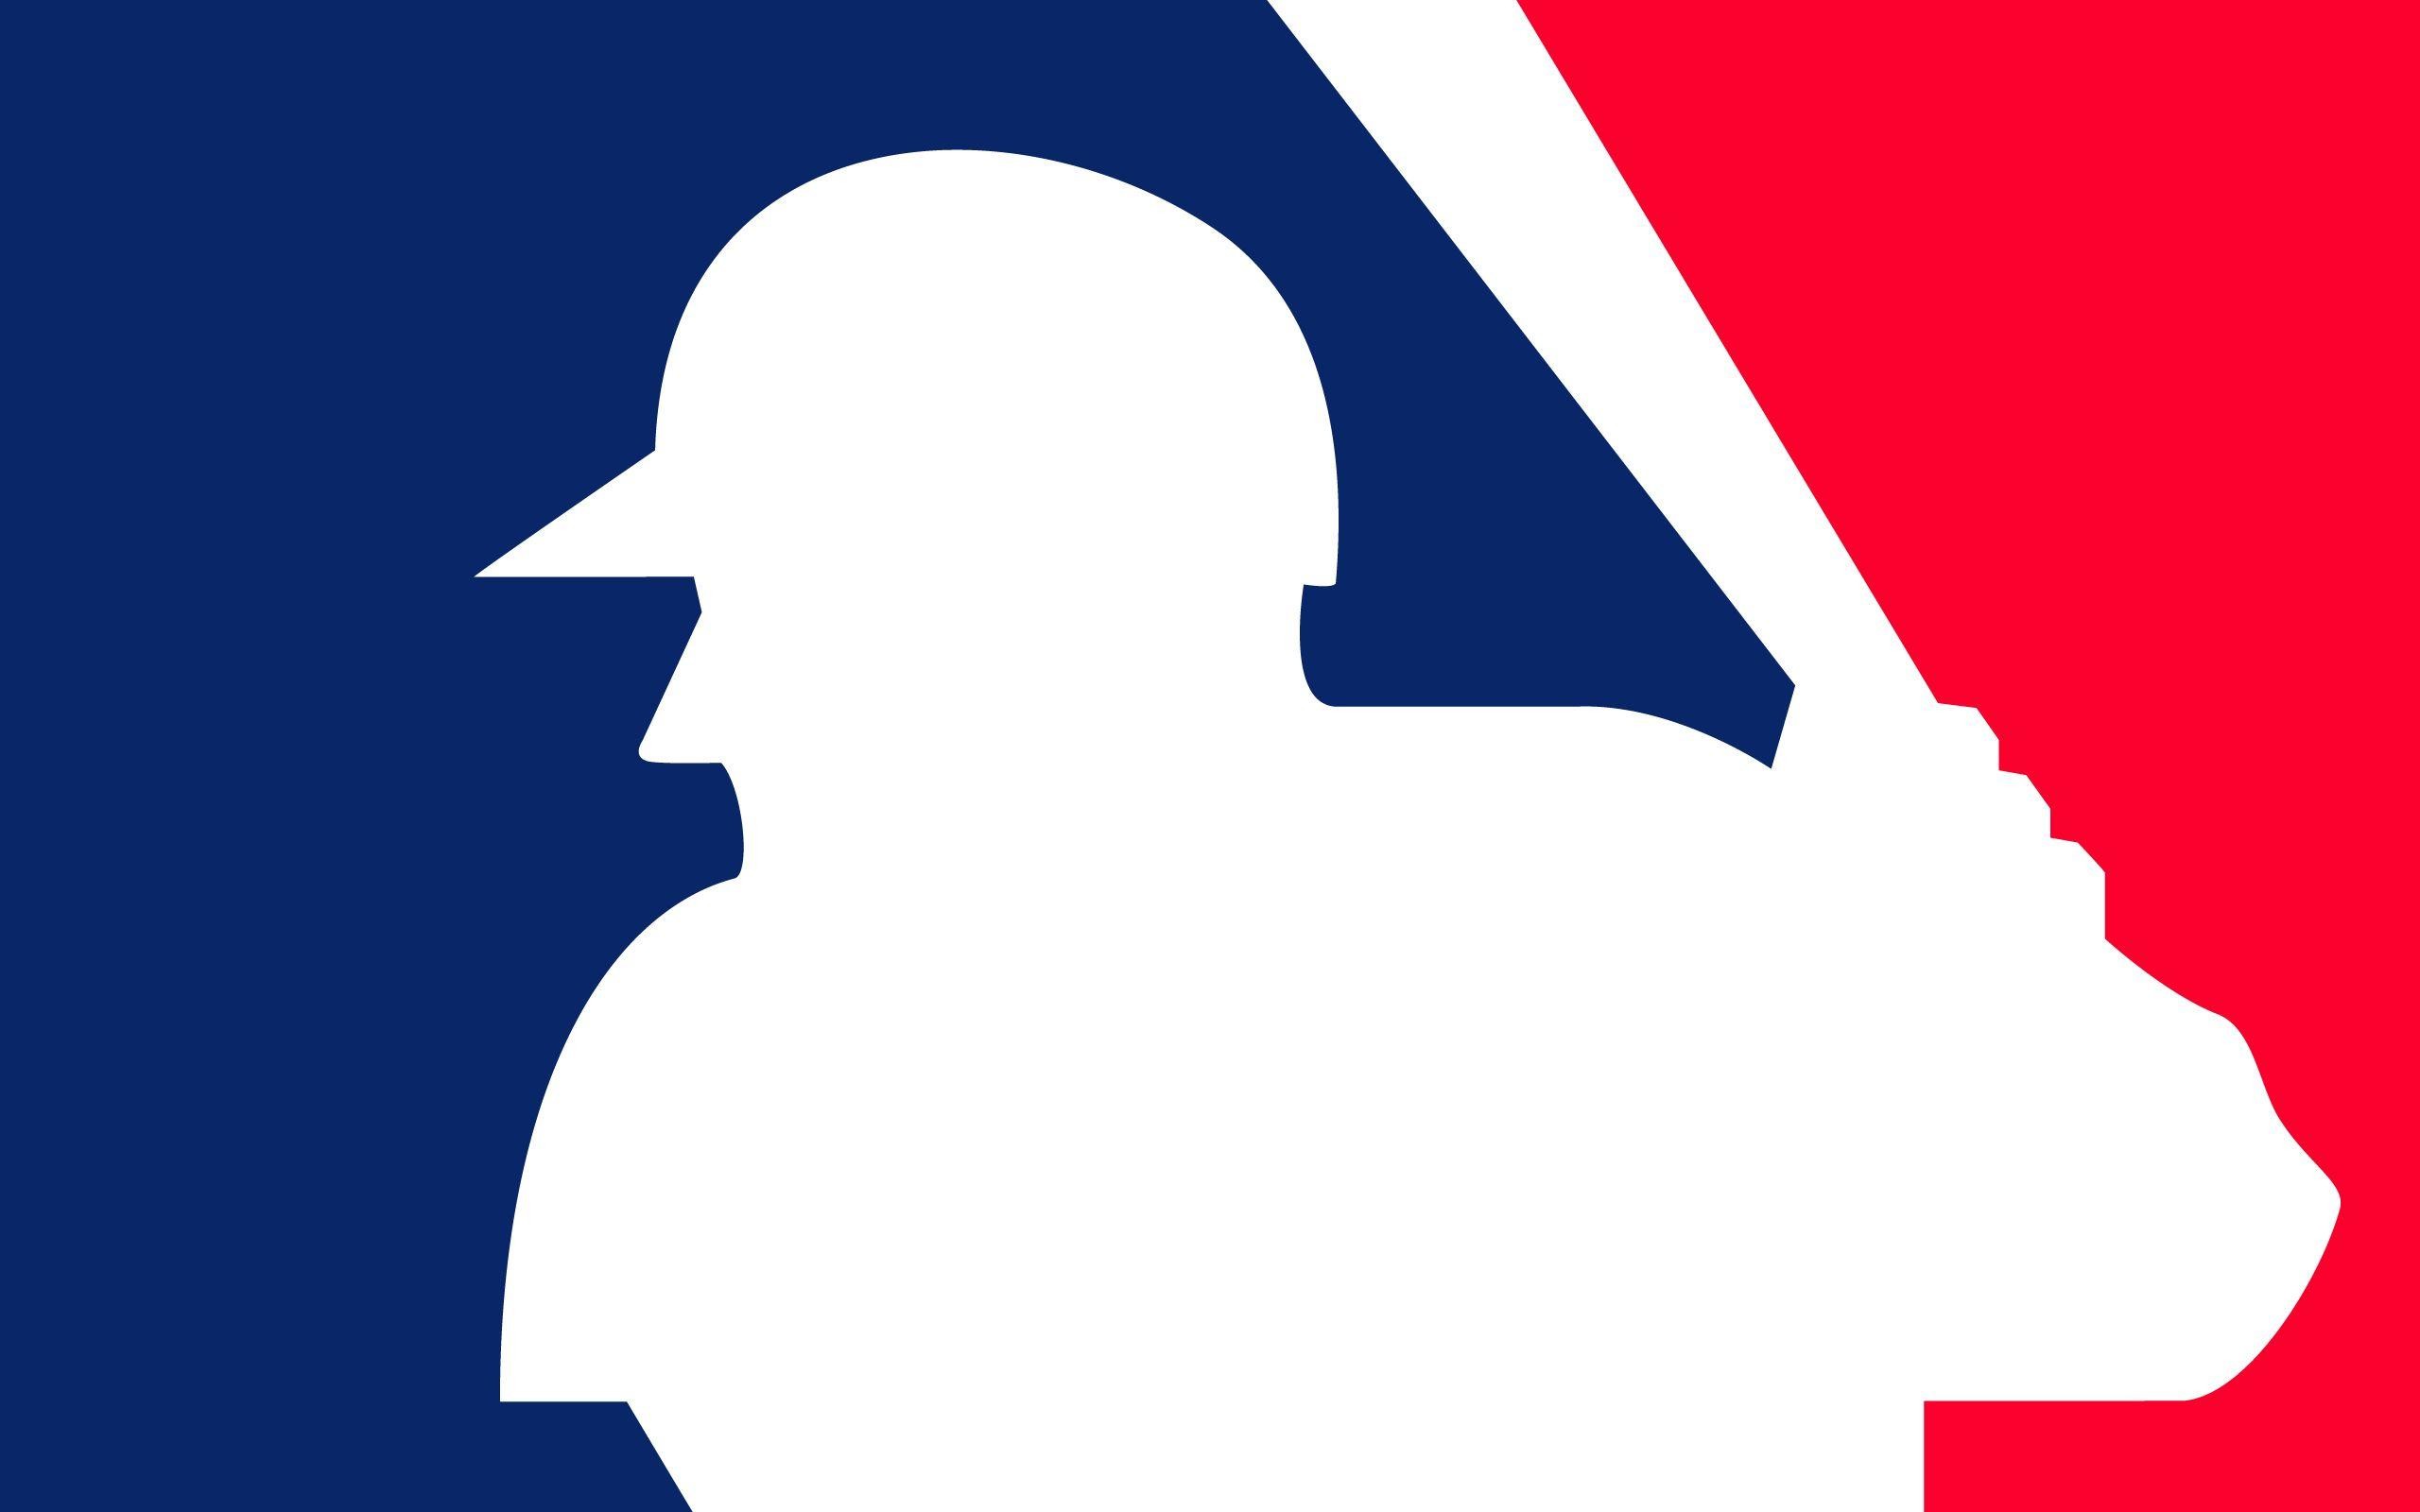 Related Pictures Mlb Draft To Test New Policies The Poughkeepsie 2560x1600